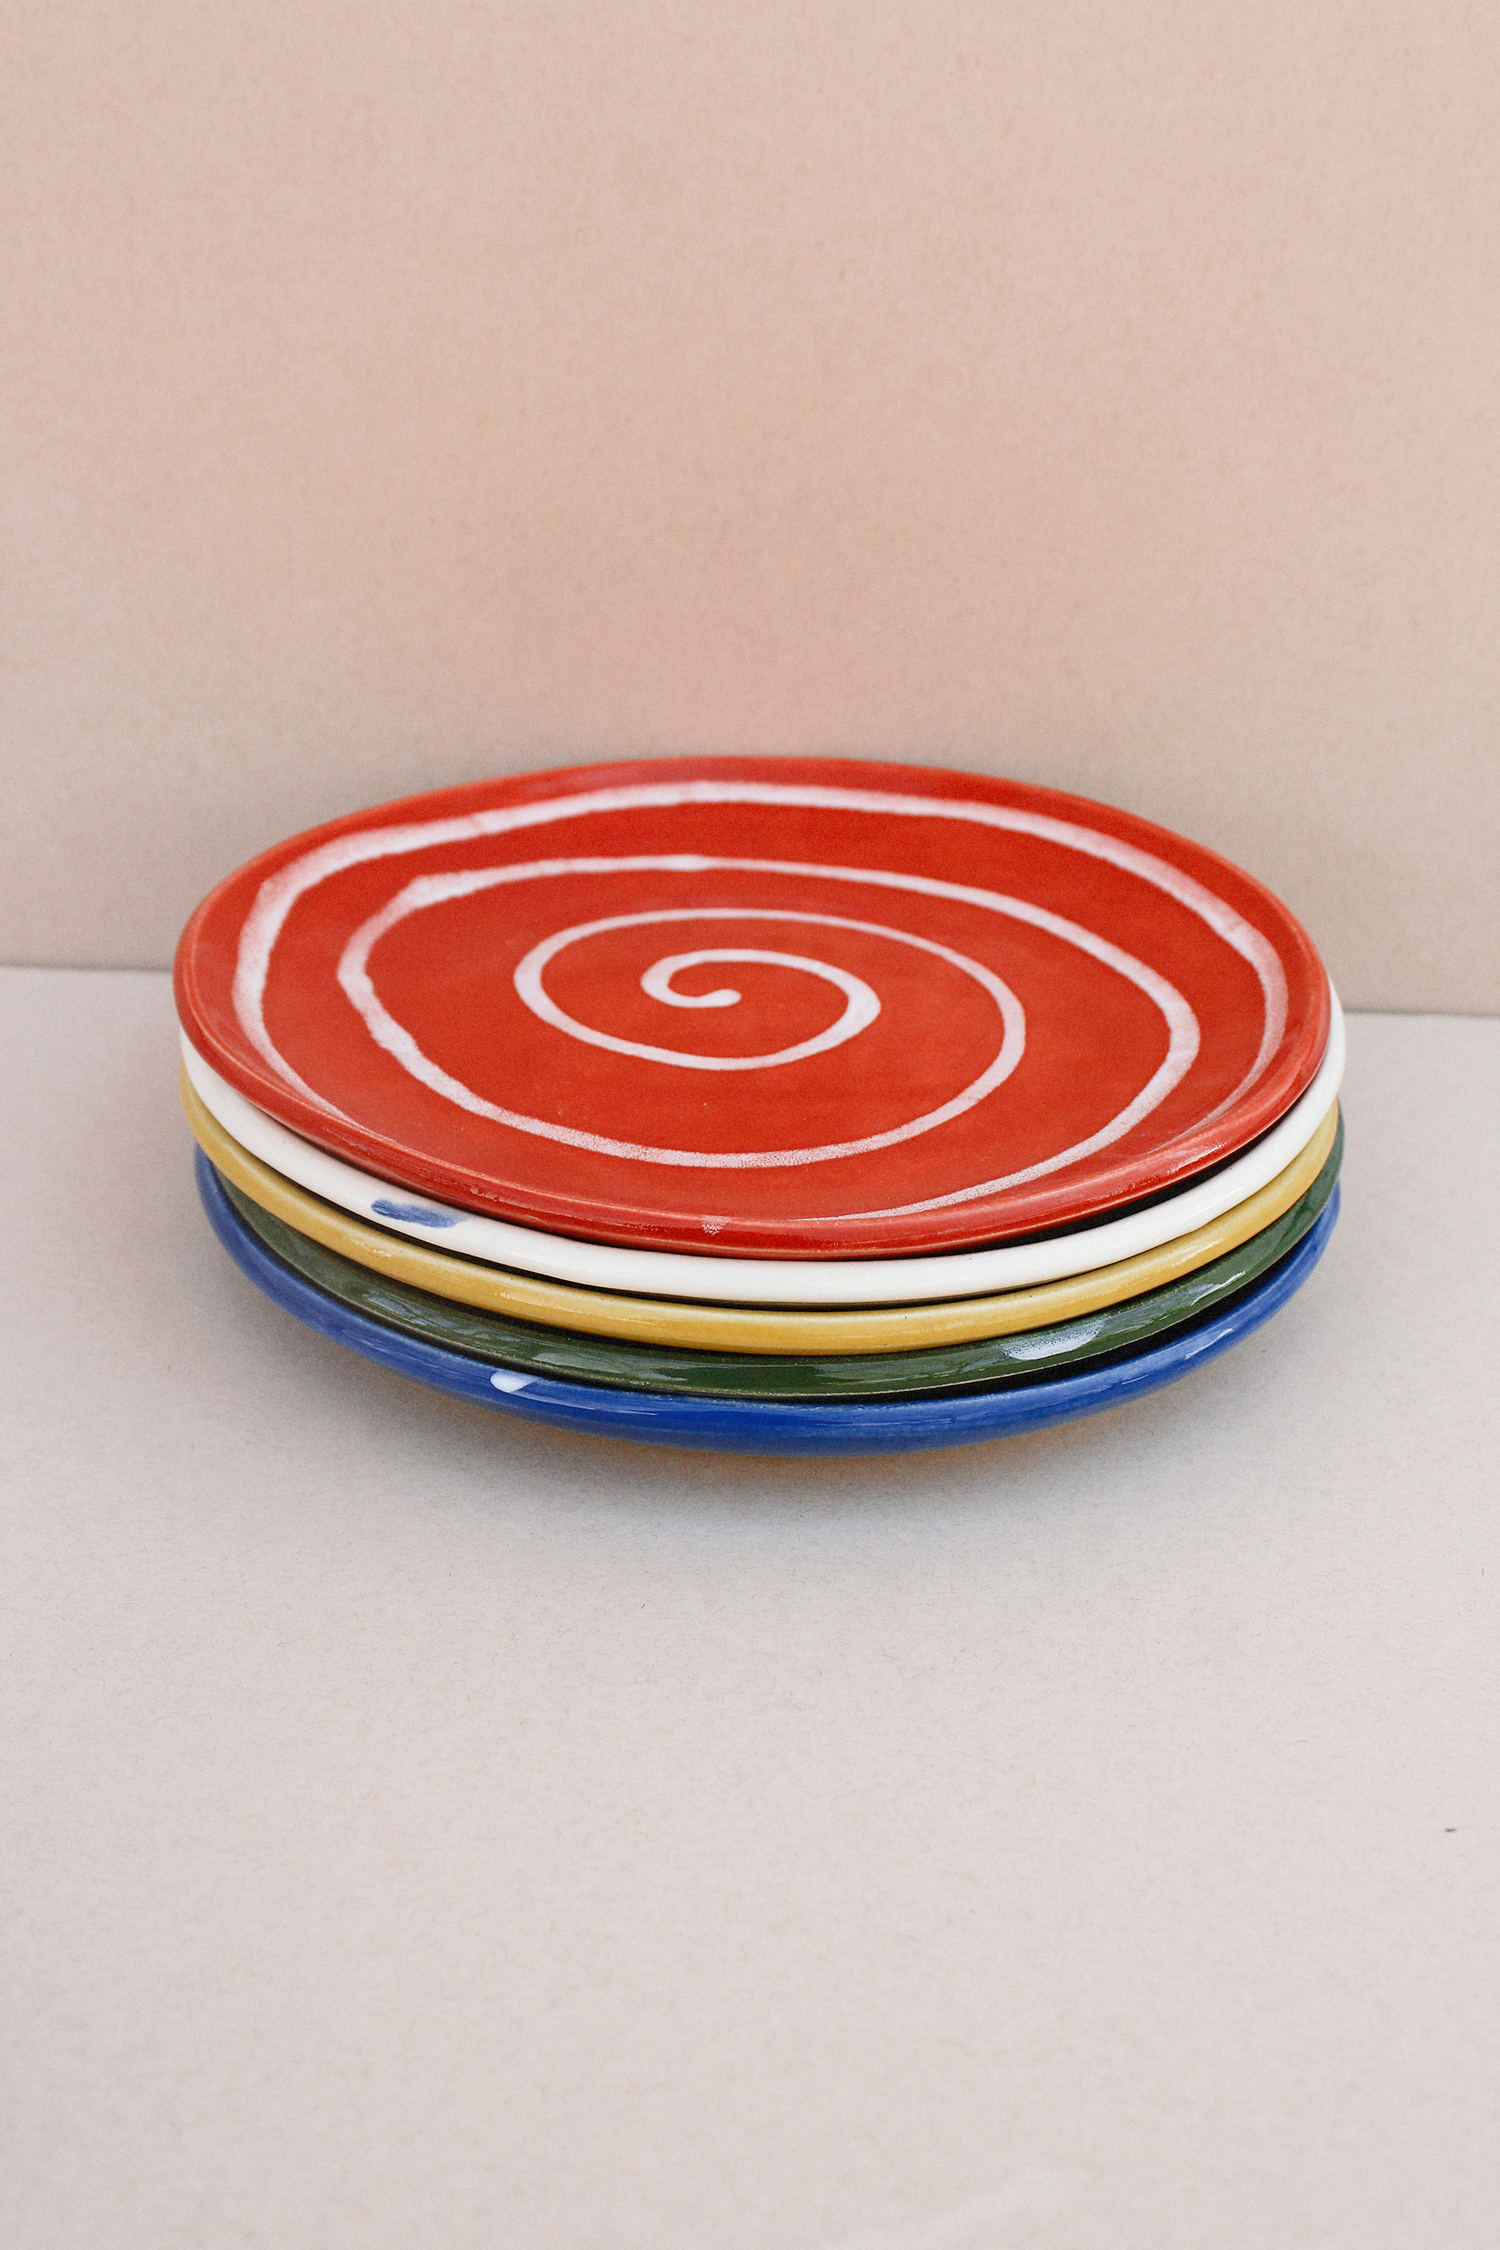 vida-plate-collection.png